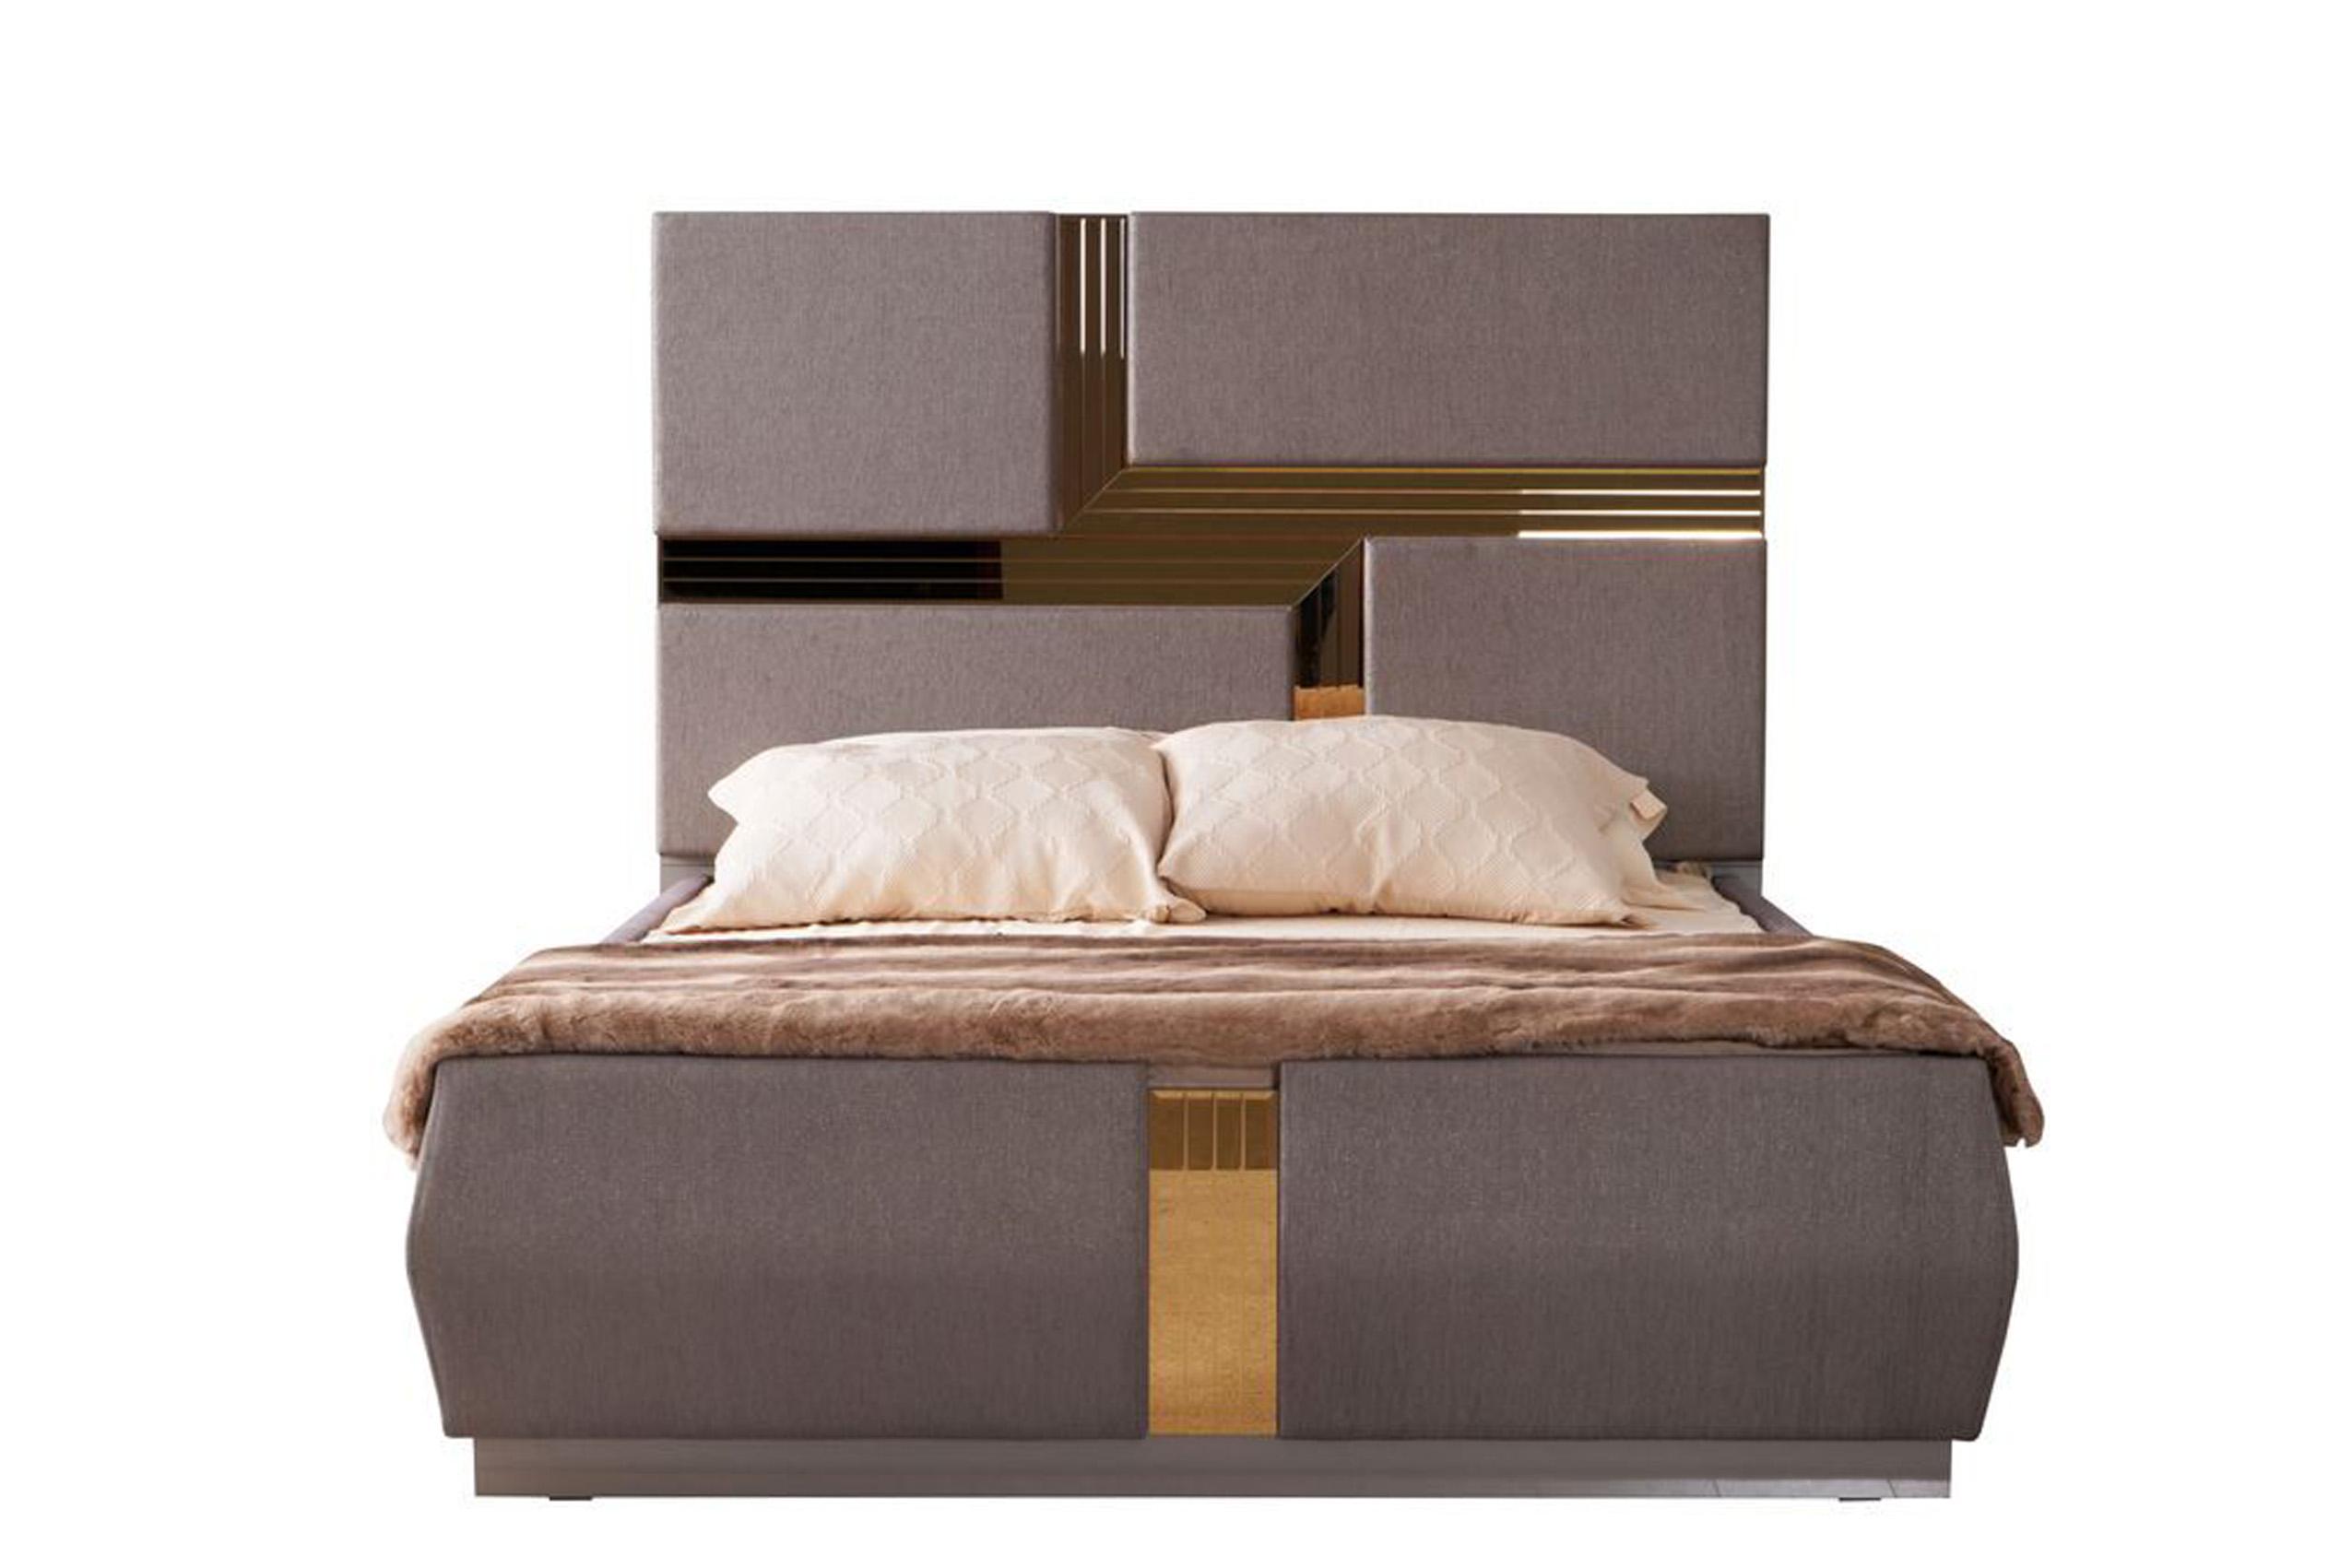 

    
Luxury Beige & Gold Fabric King Bed LORENZO Galaxy Home Contemporary
